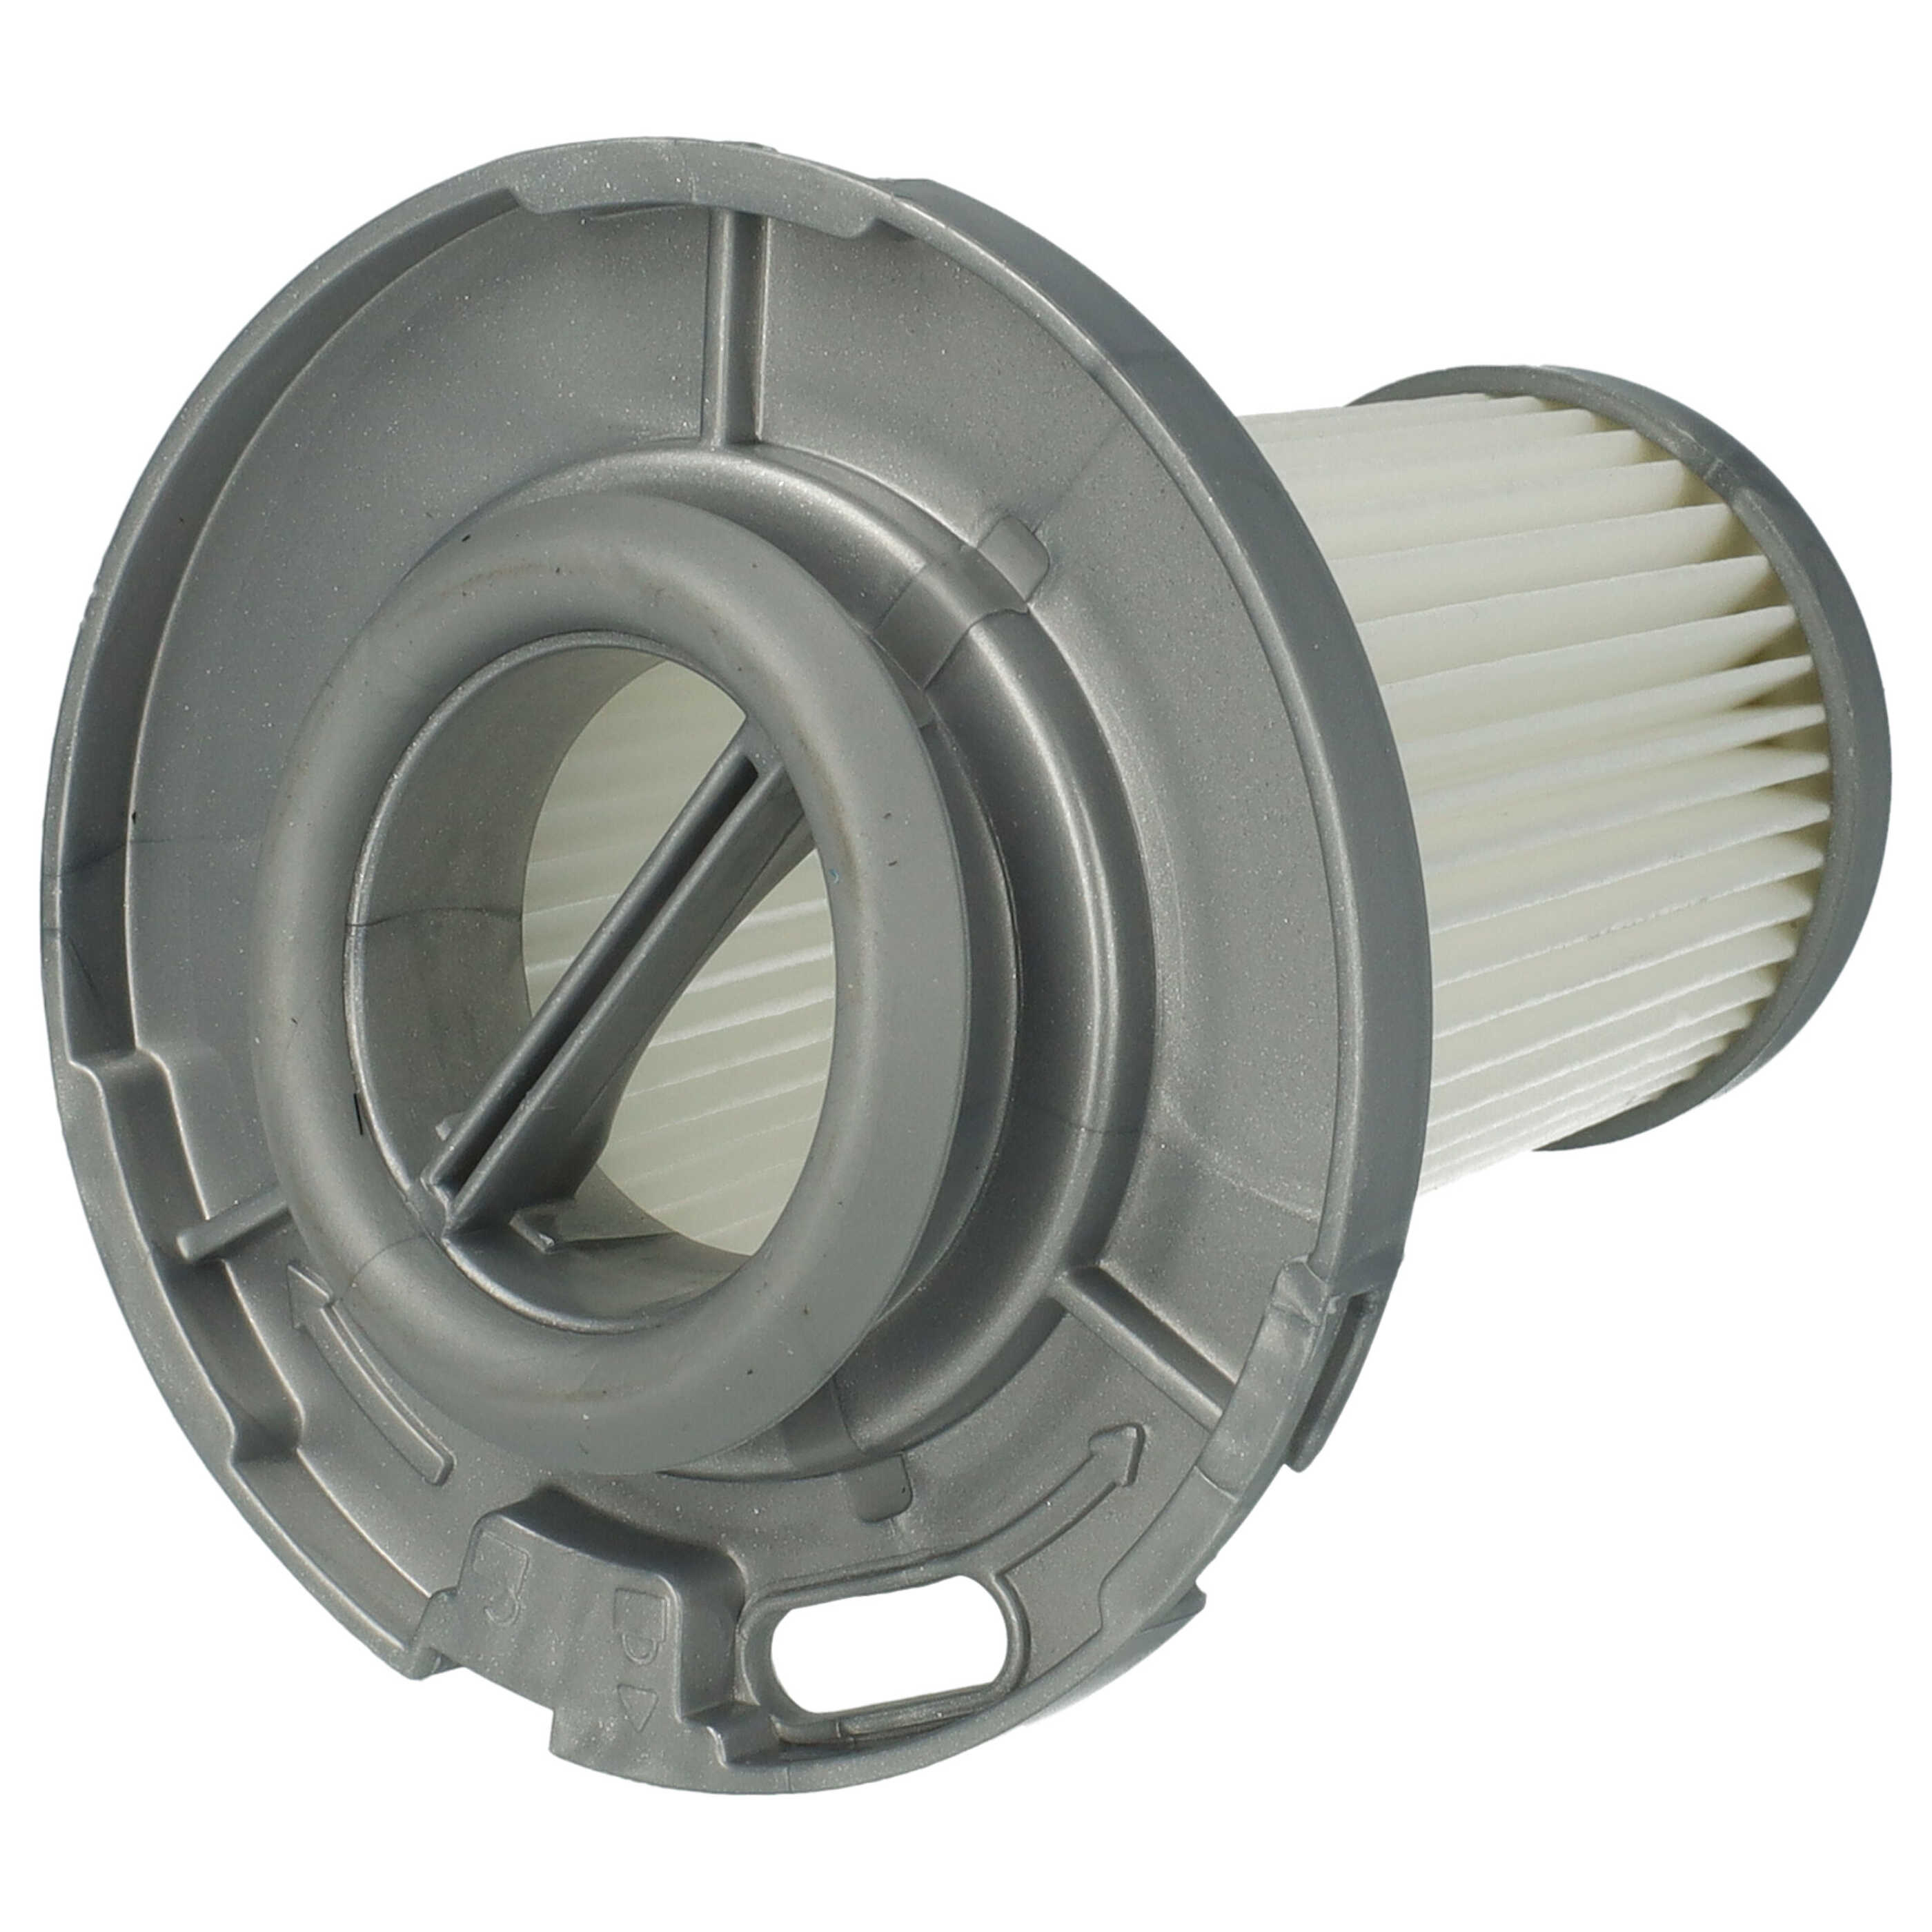 1x cartridge filter replaces Rowenta ZR009005 for RowentaVacuum Cleaner